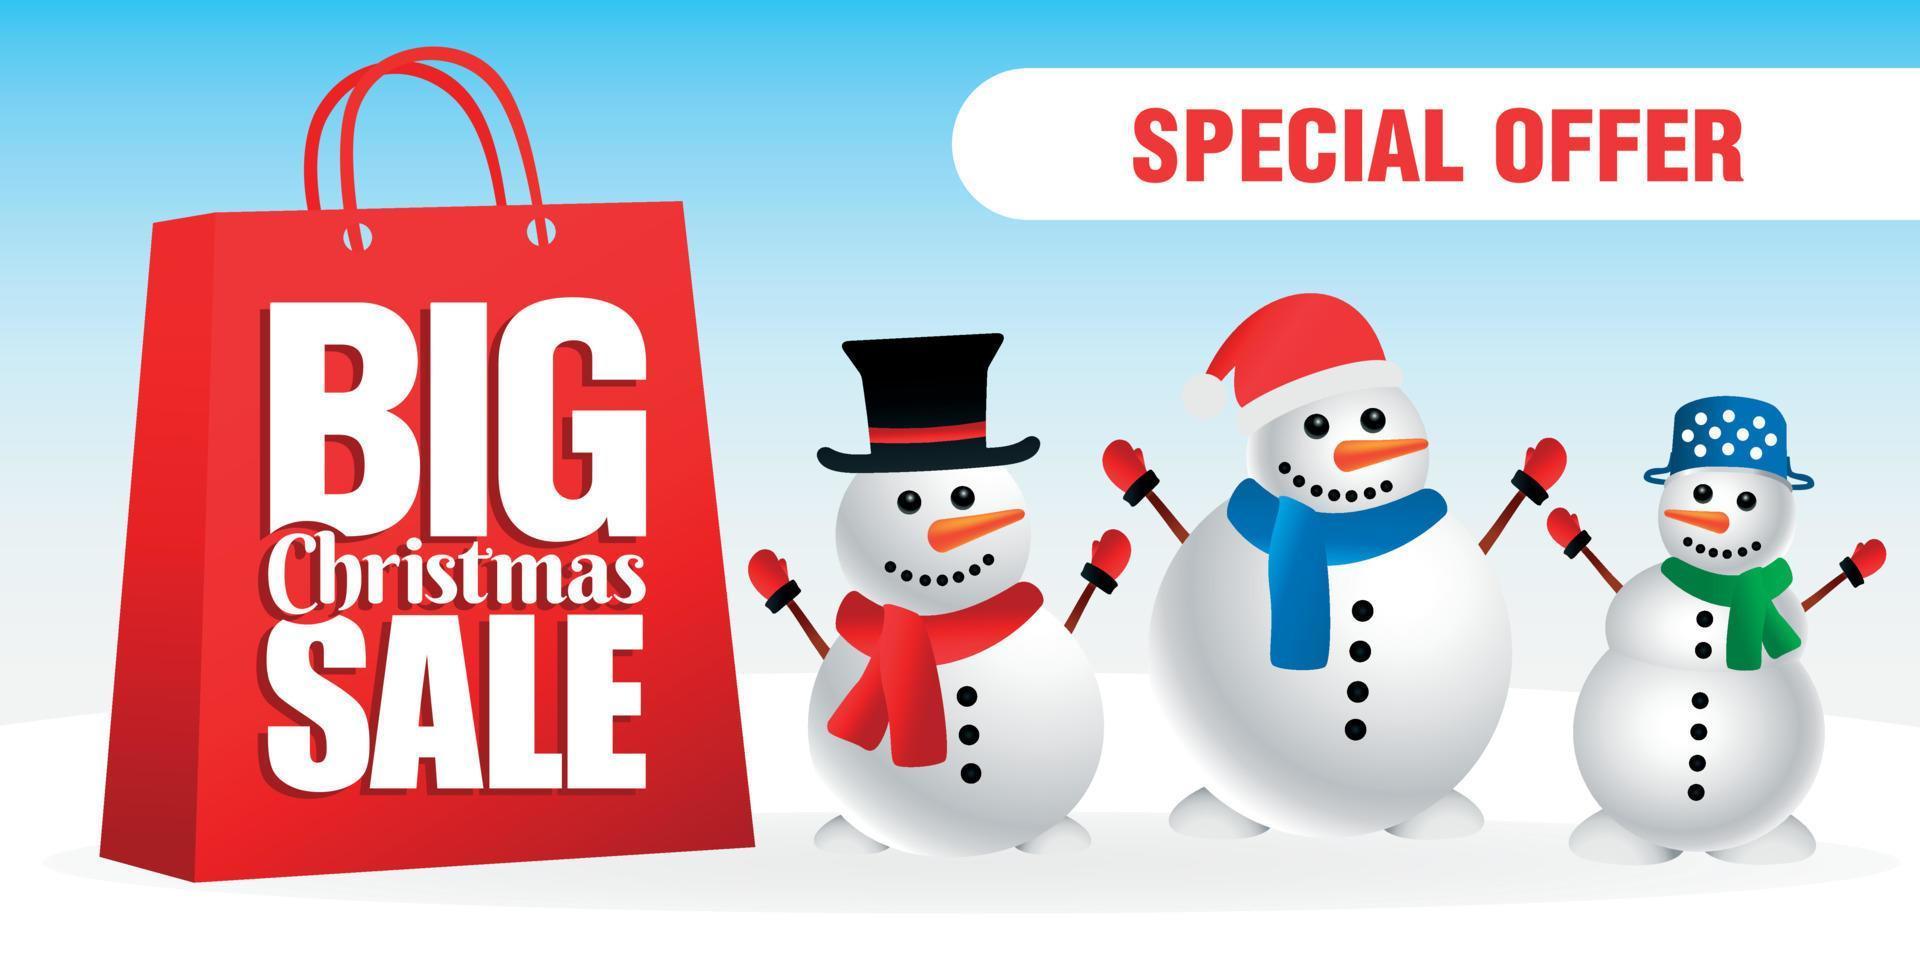 Special offer big christmas sale banner vector